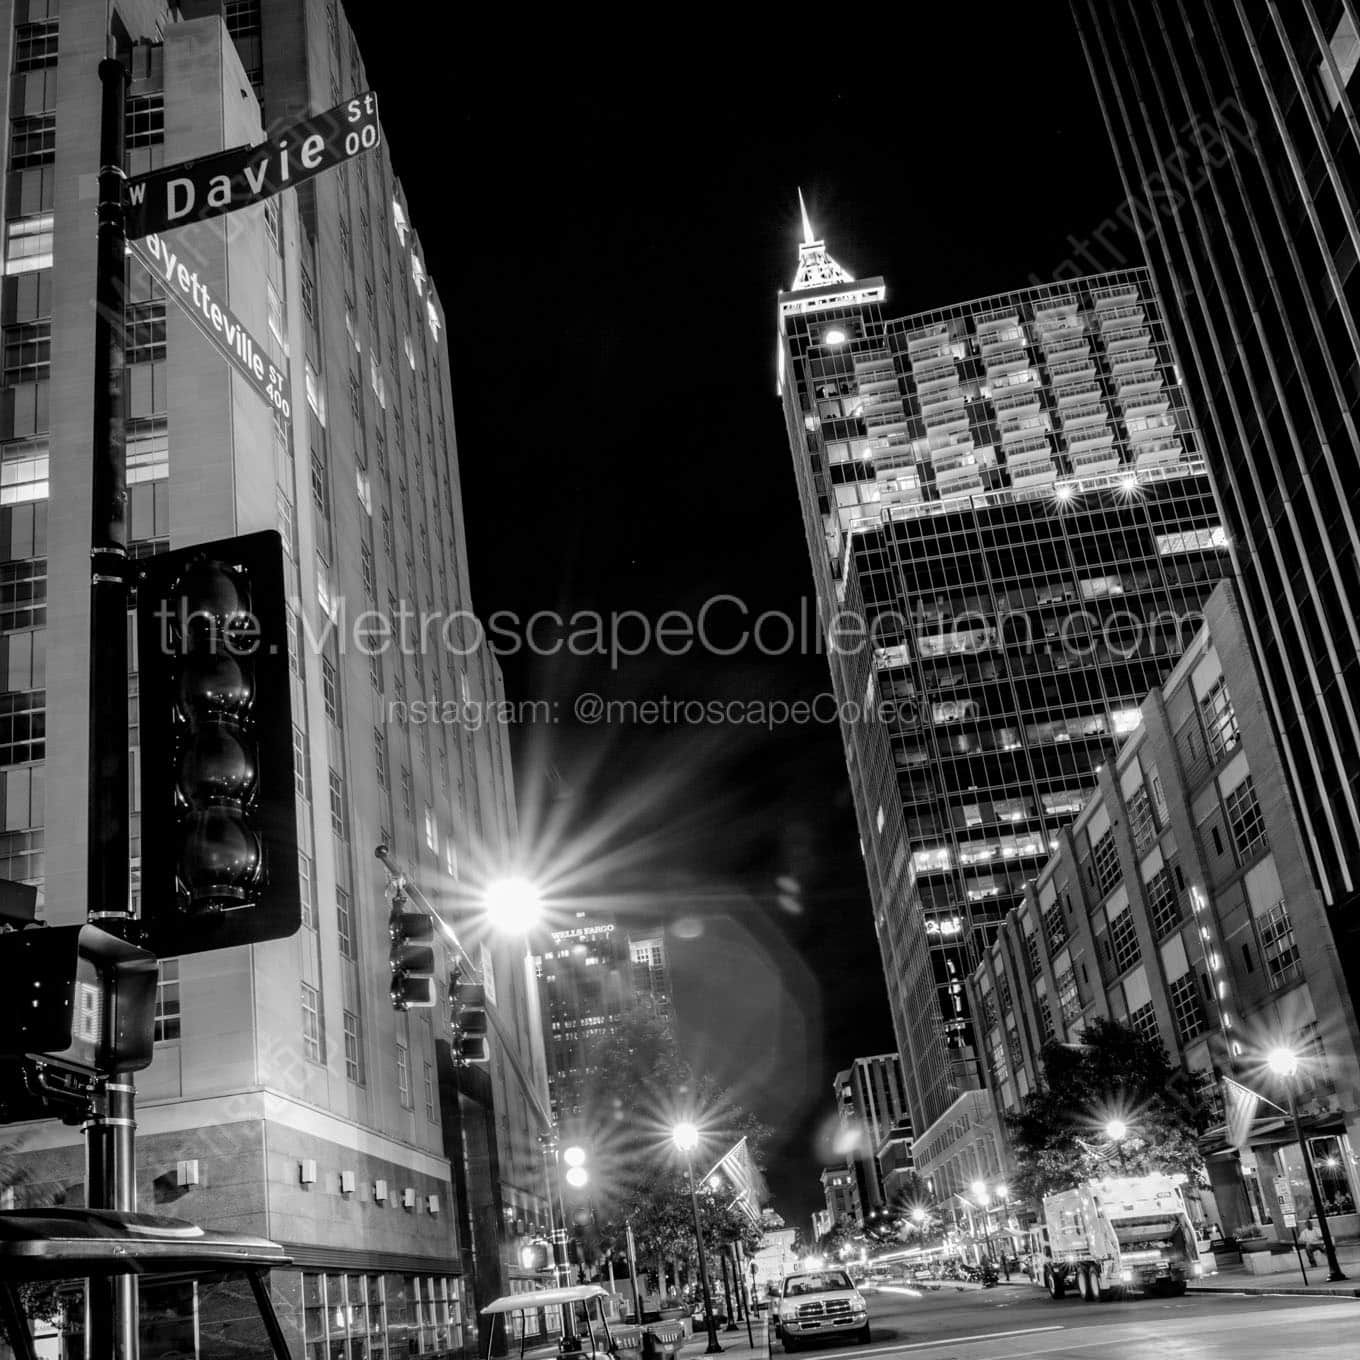 davie street at fayetteville downtown raleigh nc Black & White Wall Art